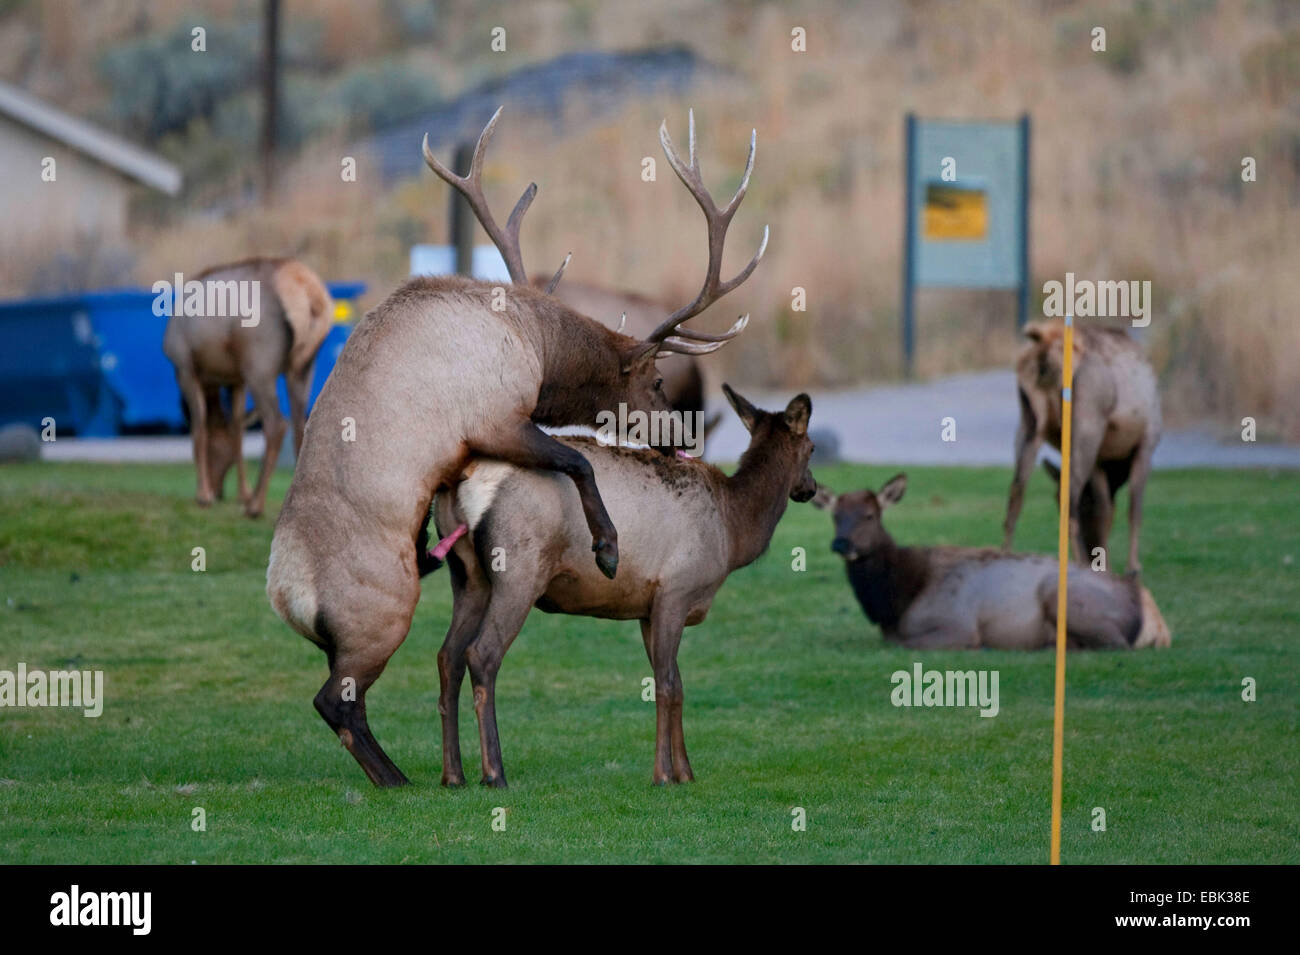 wapiti, elk (Cervus elaphus canadensis, Cervus canadensis), copulating on lawn in town, USA, Wyoming, Yellowstone National Park, Mammoth Hot Springs Stock Photo